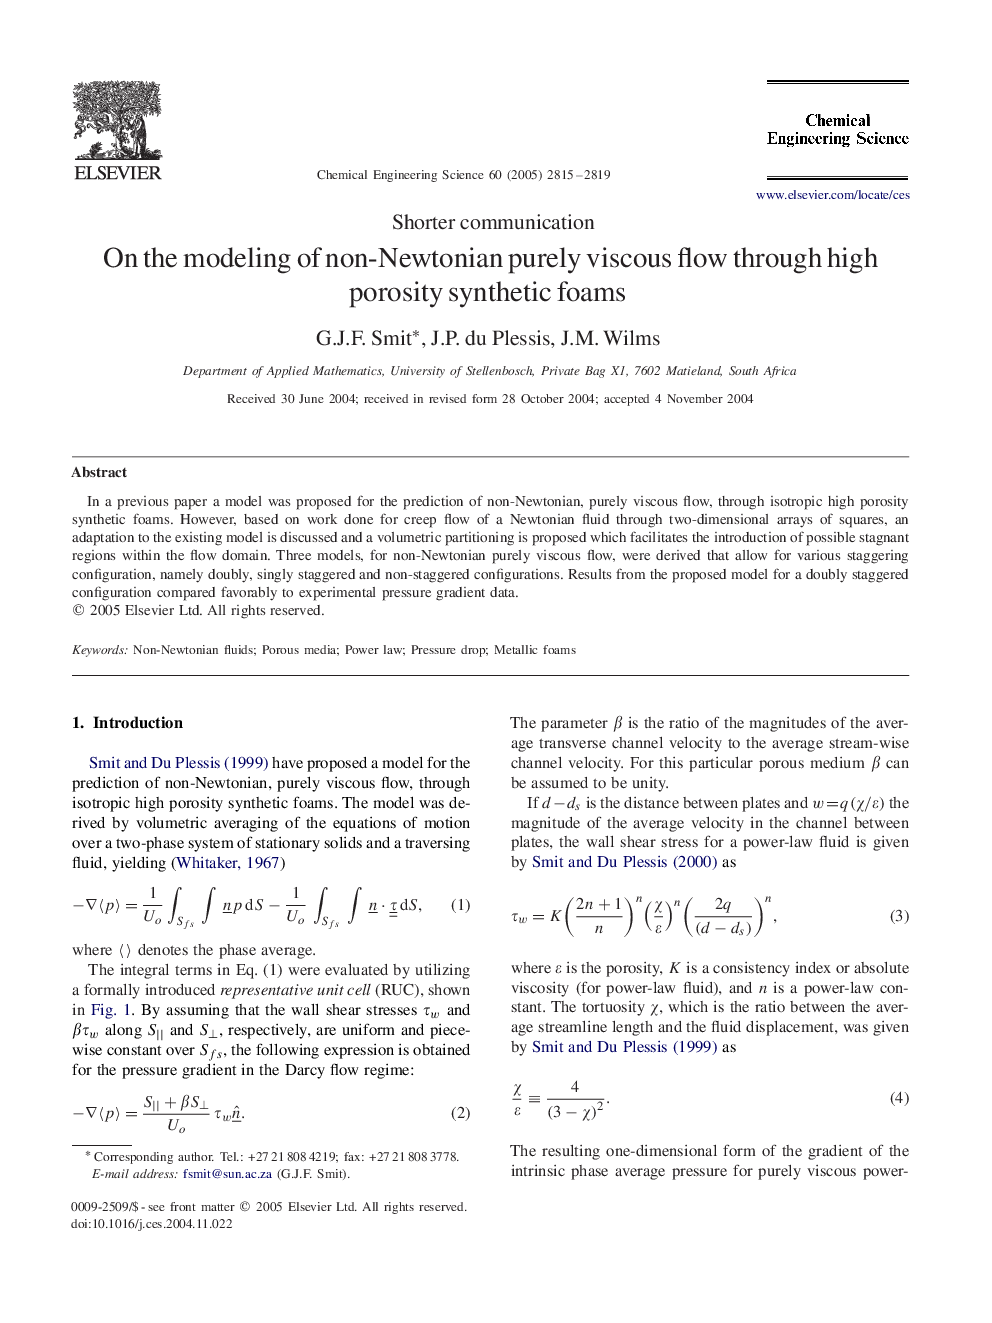 On the modeling of non-Newtonian purely viscous flow through high porosity synthetic foams